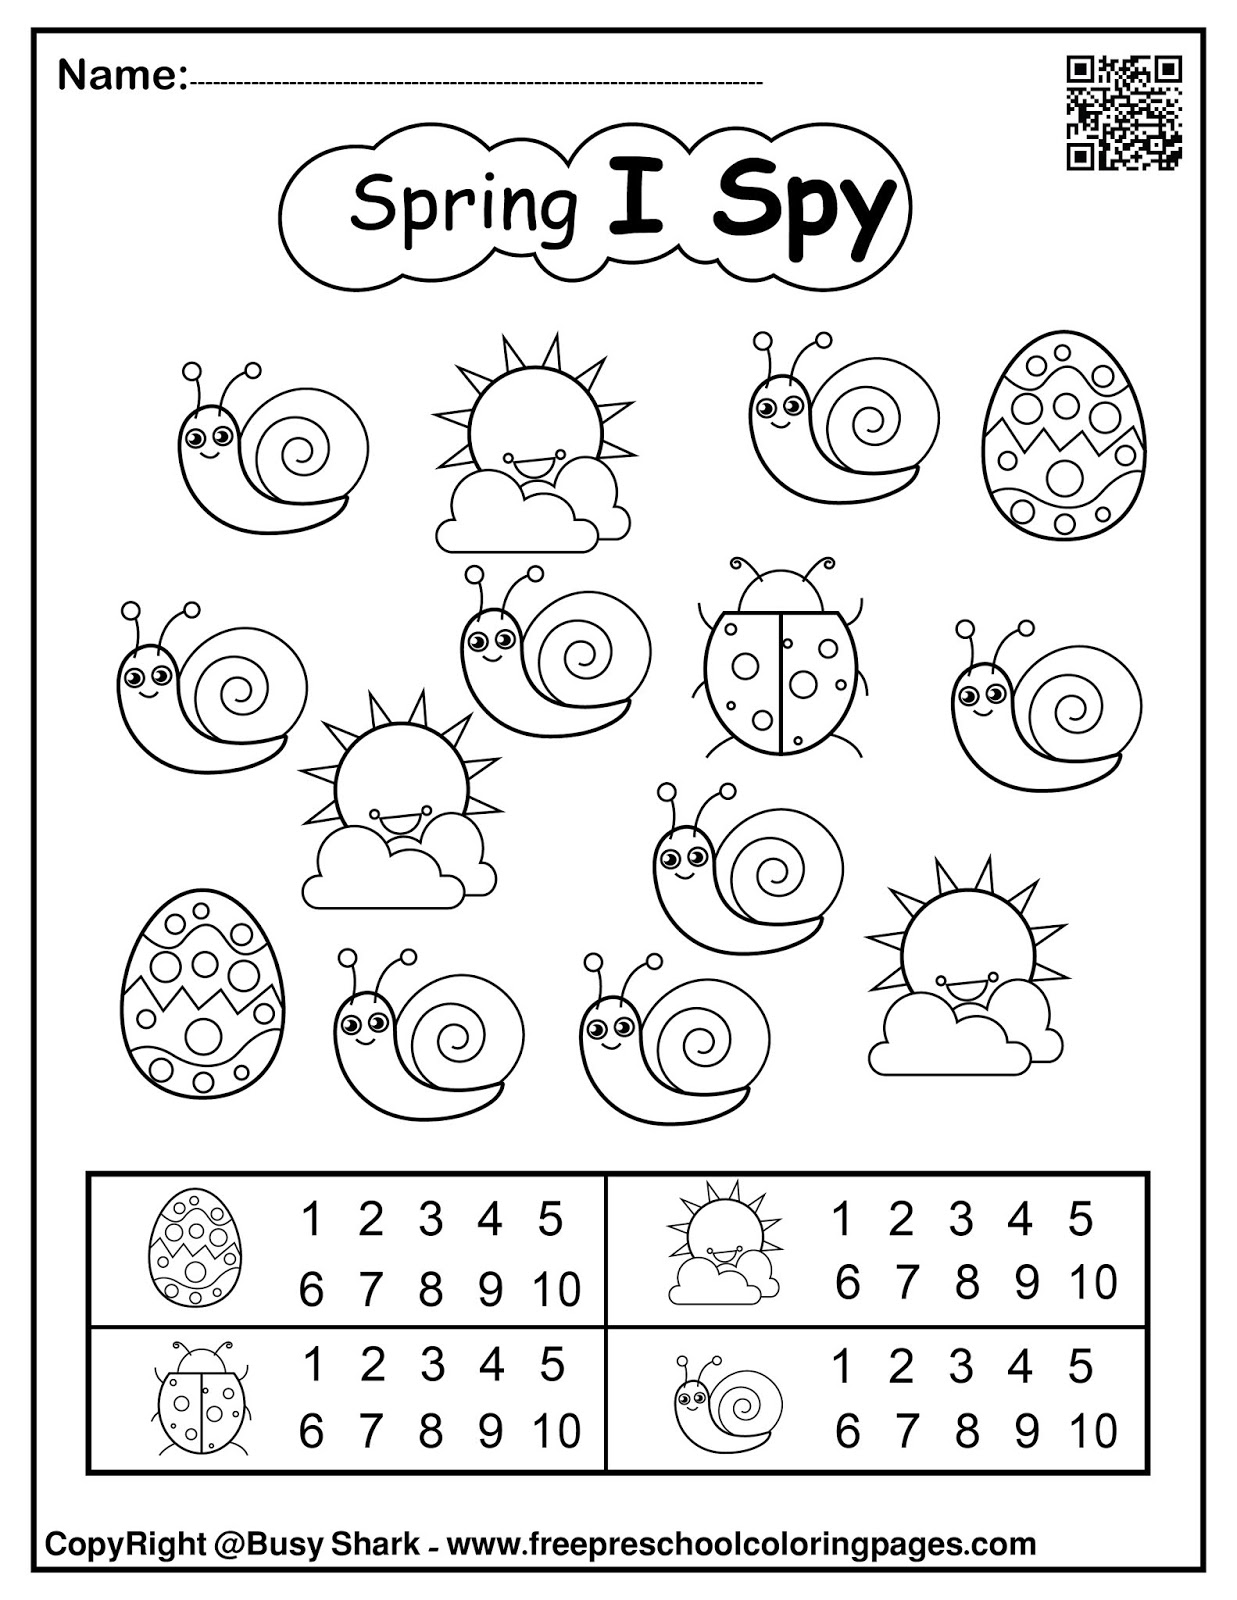 I Spy free preschool coloring pages ...